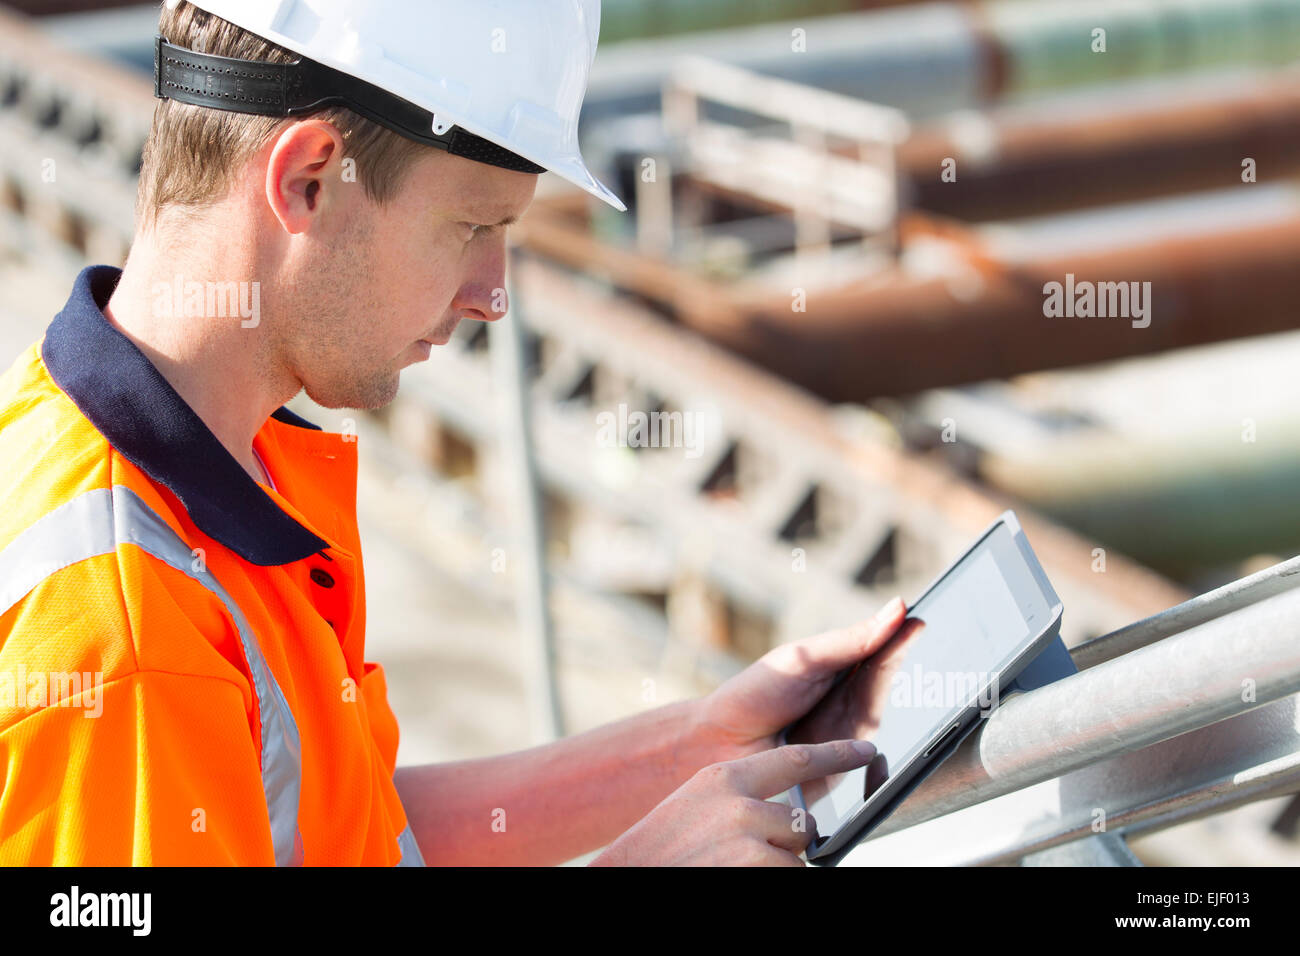 Man working at construction site, helmet Stock Photo